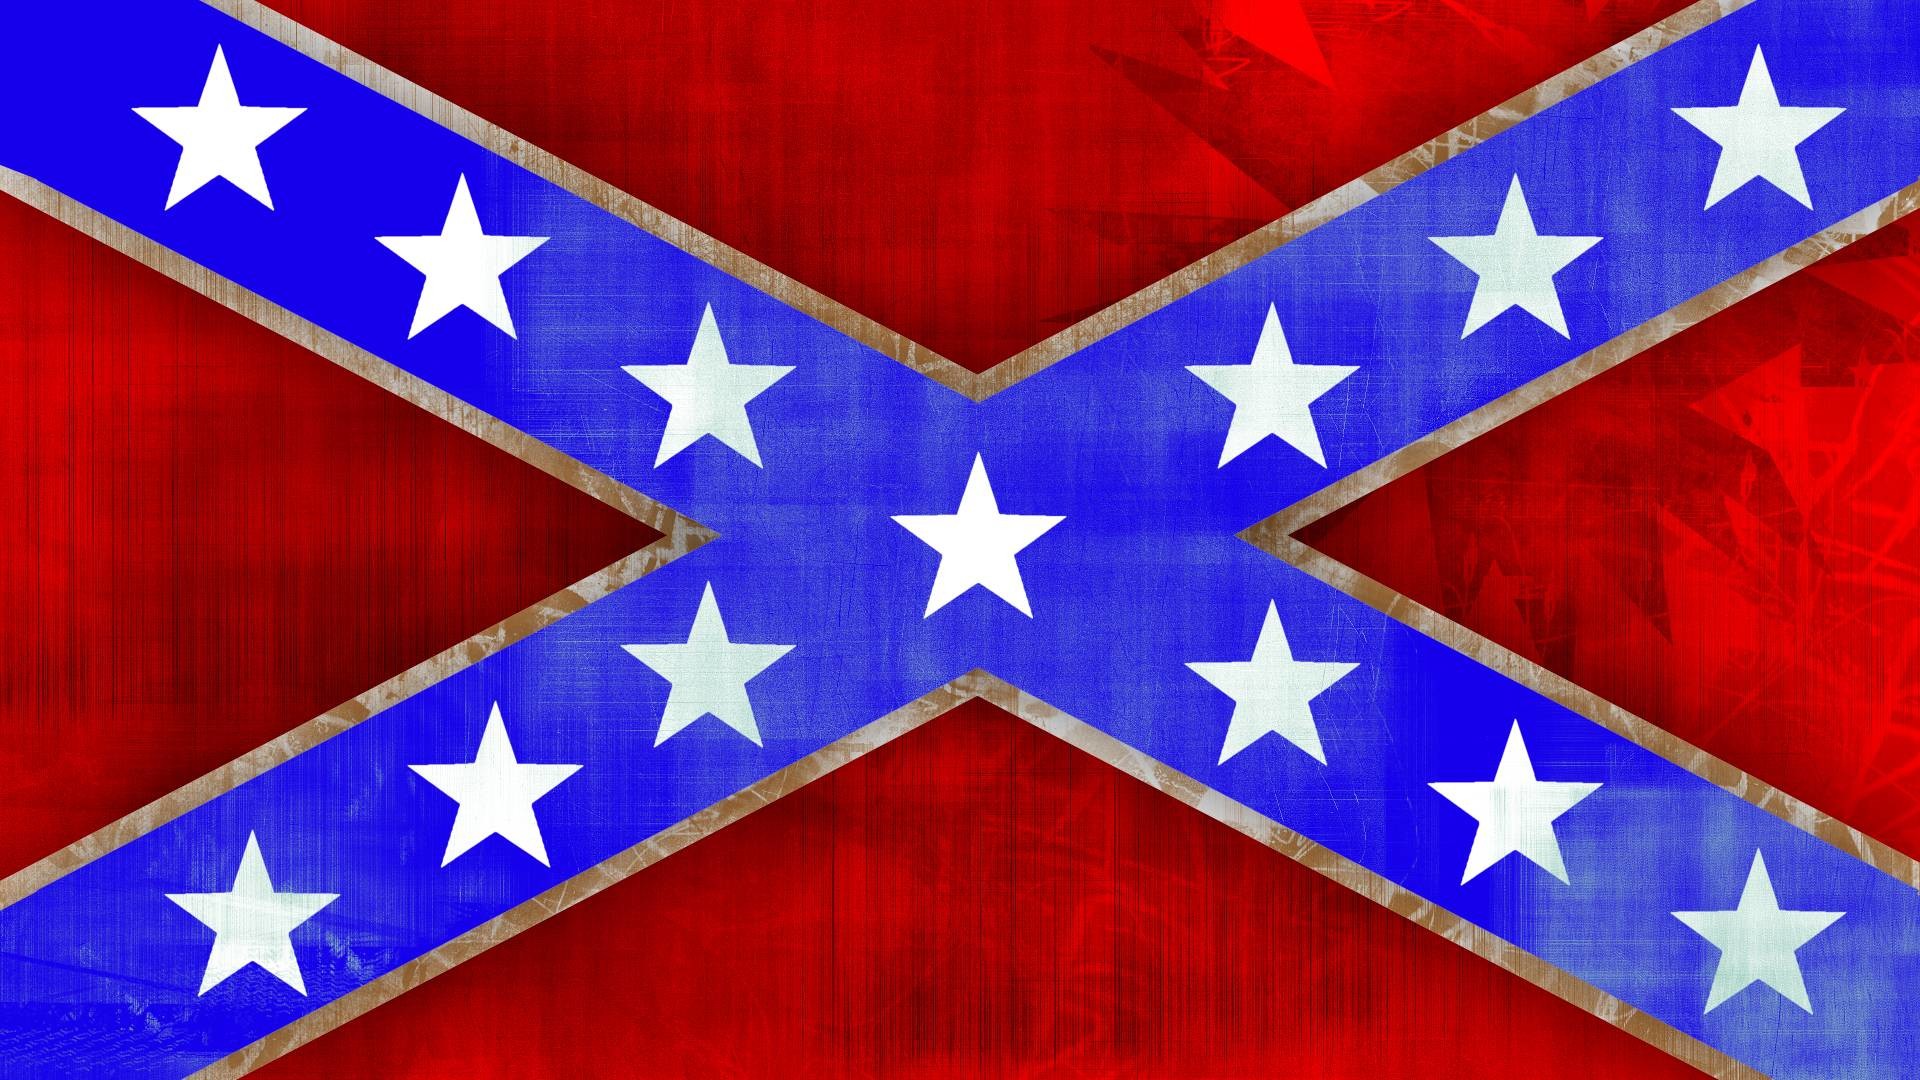 Cool Confederate Flag Wallpapers Images Pictures – Becuo